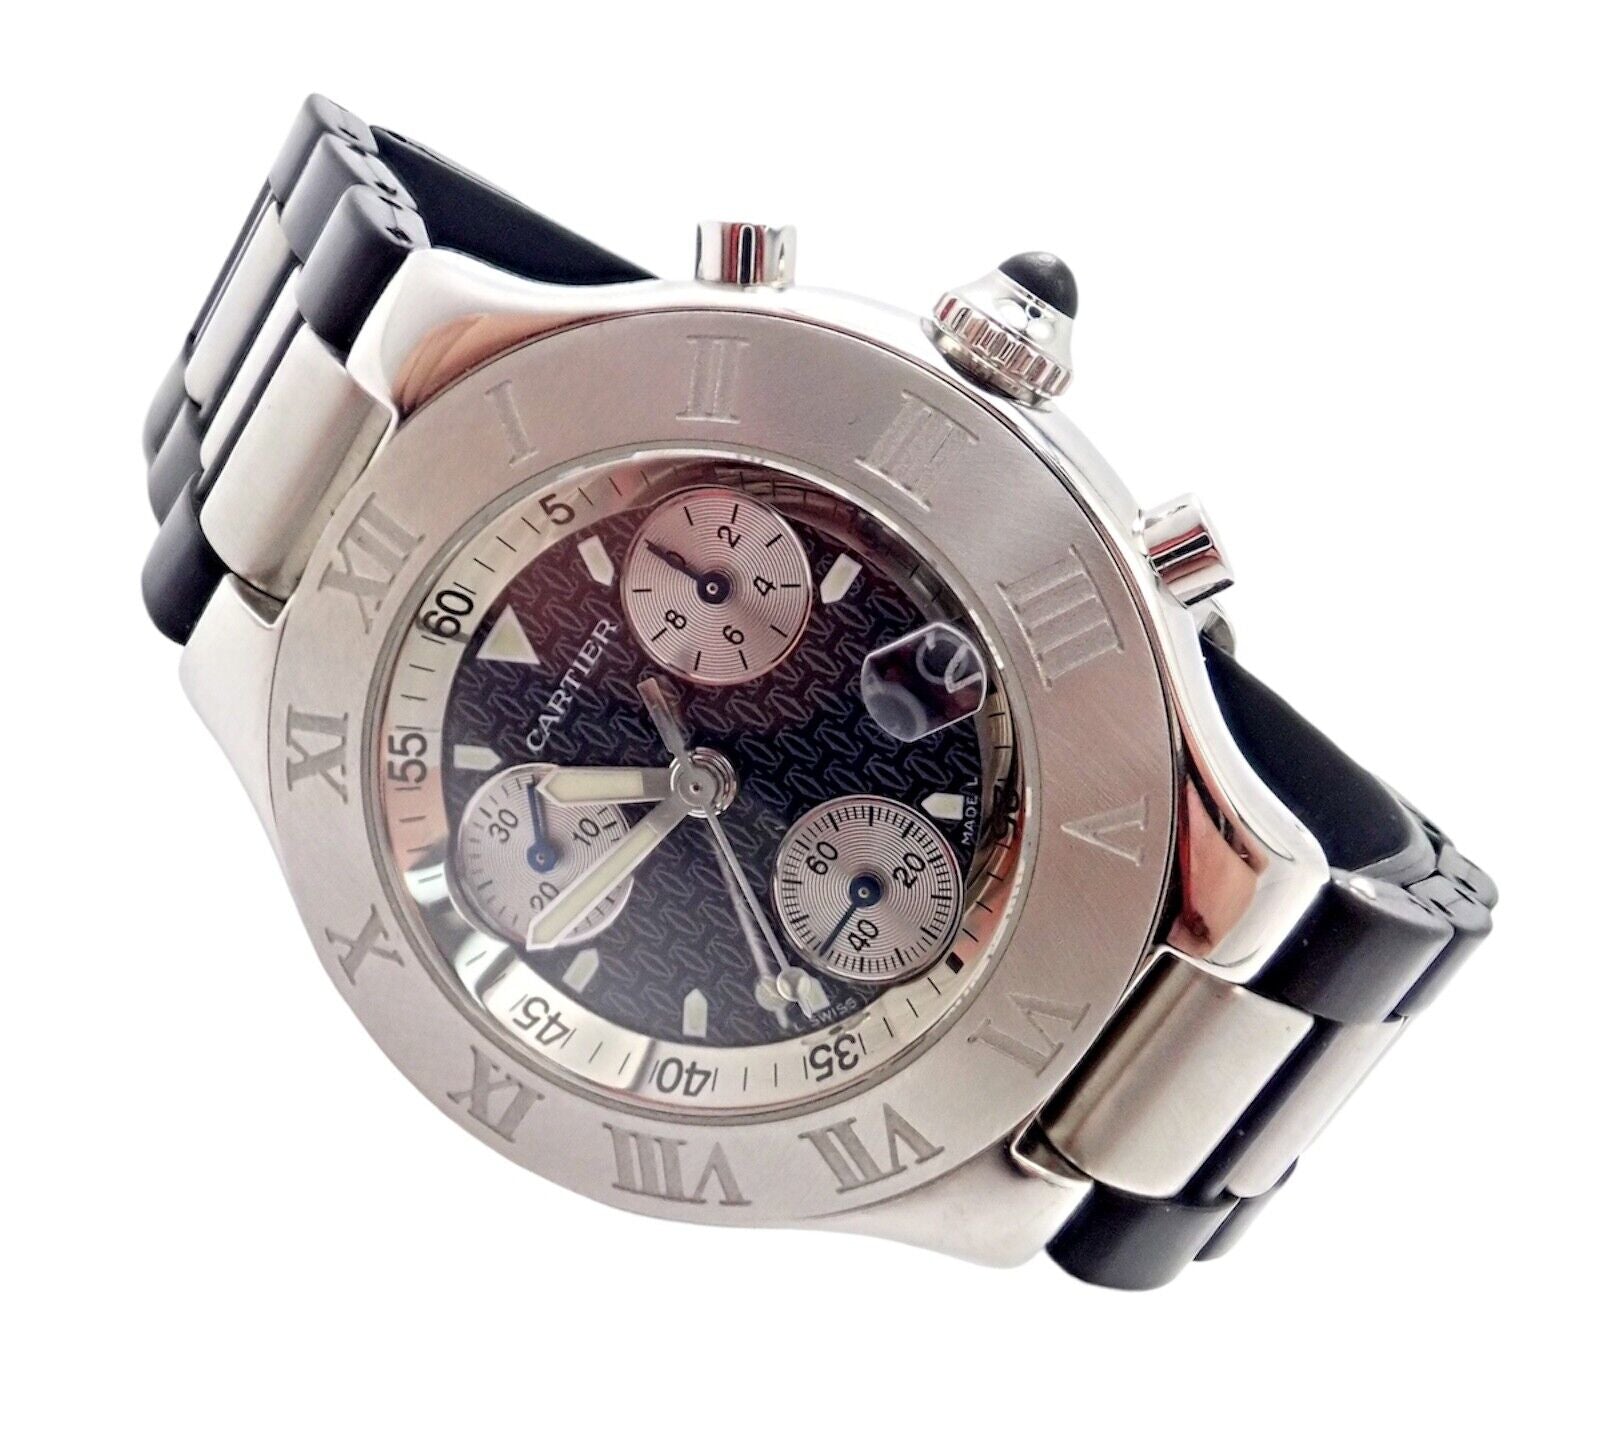 Cartier Jewelry & Watches:Watches, Parts & Accessories:Watches:Wristwatches Authentic! Cartier Stainless Steel Chronograph 21 Quartz Rubber Band Watch